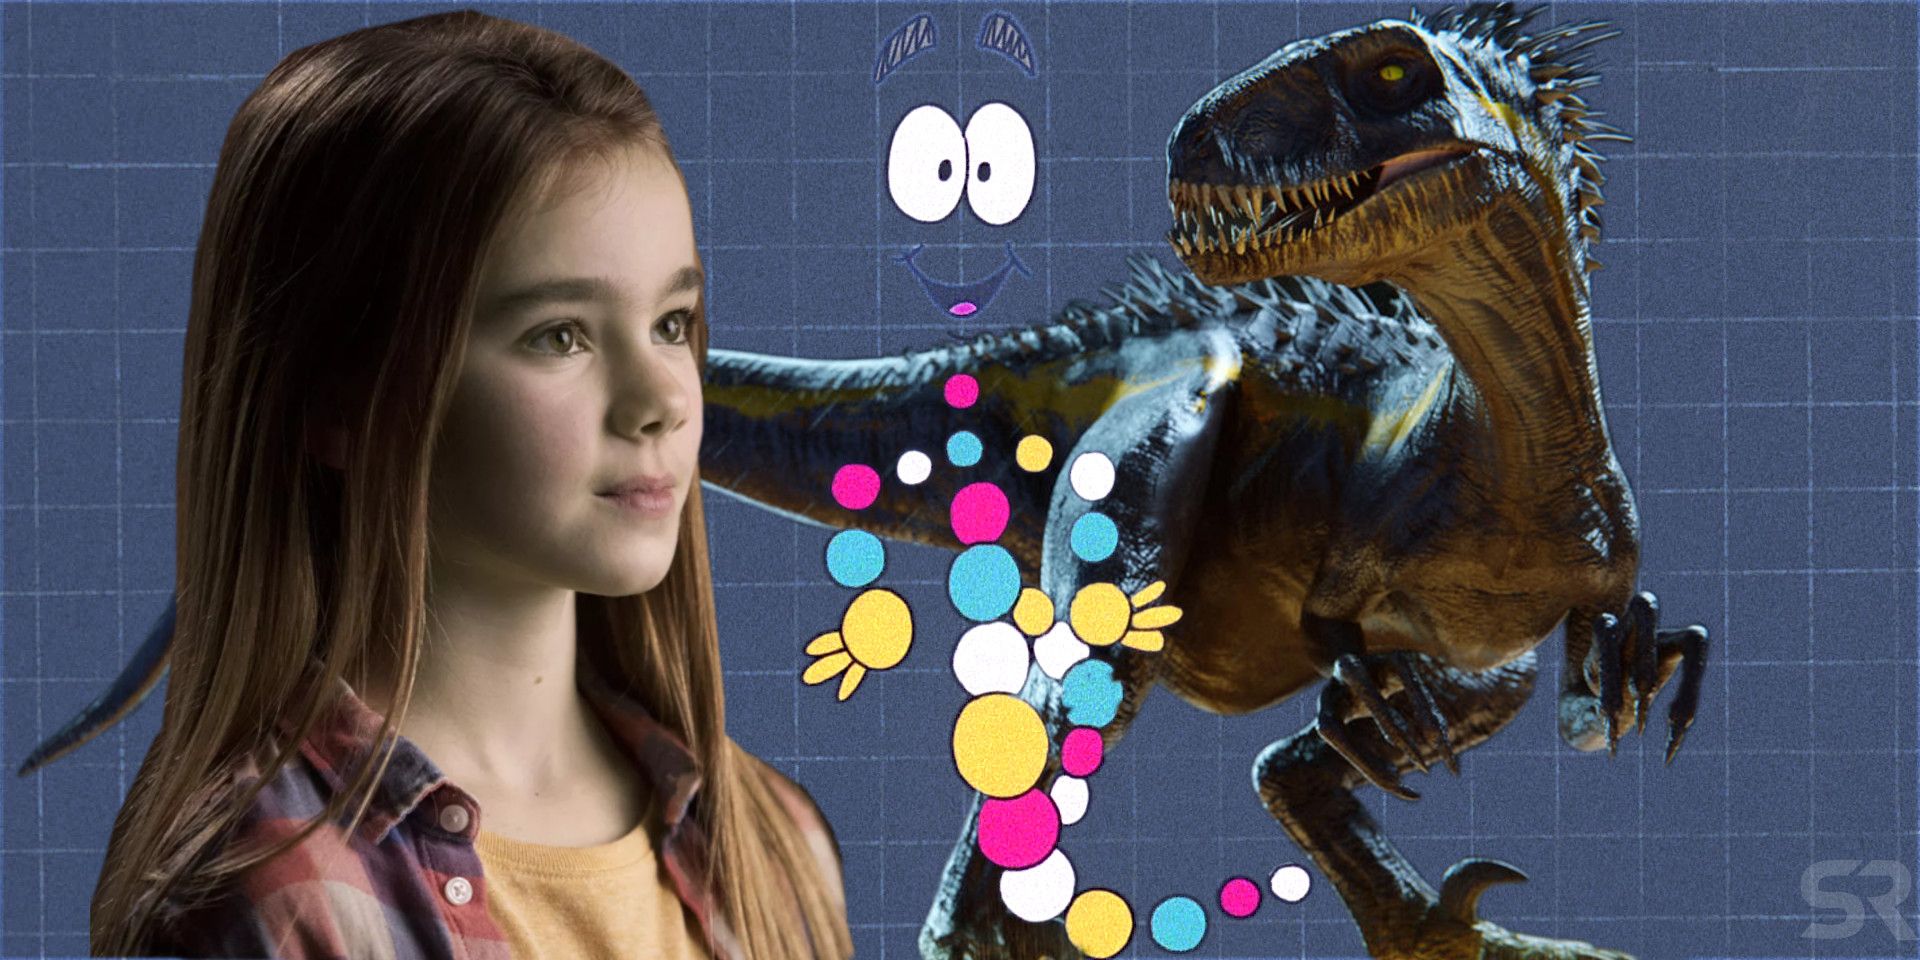 Jurassic World 2 Theory: The Indoraptor's Other Dominant DNA Will Make You Sick